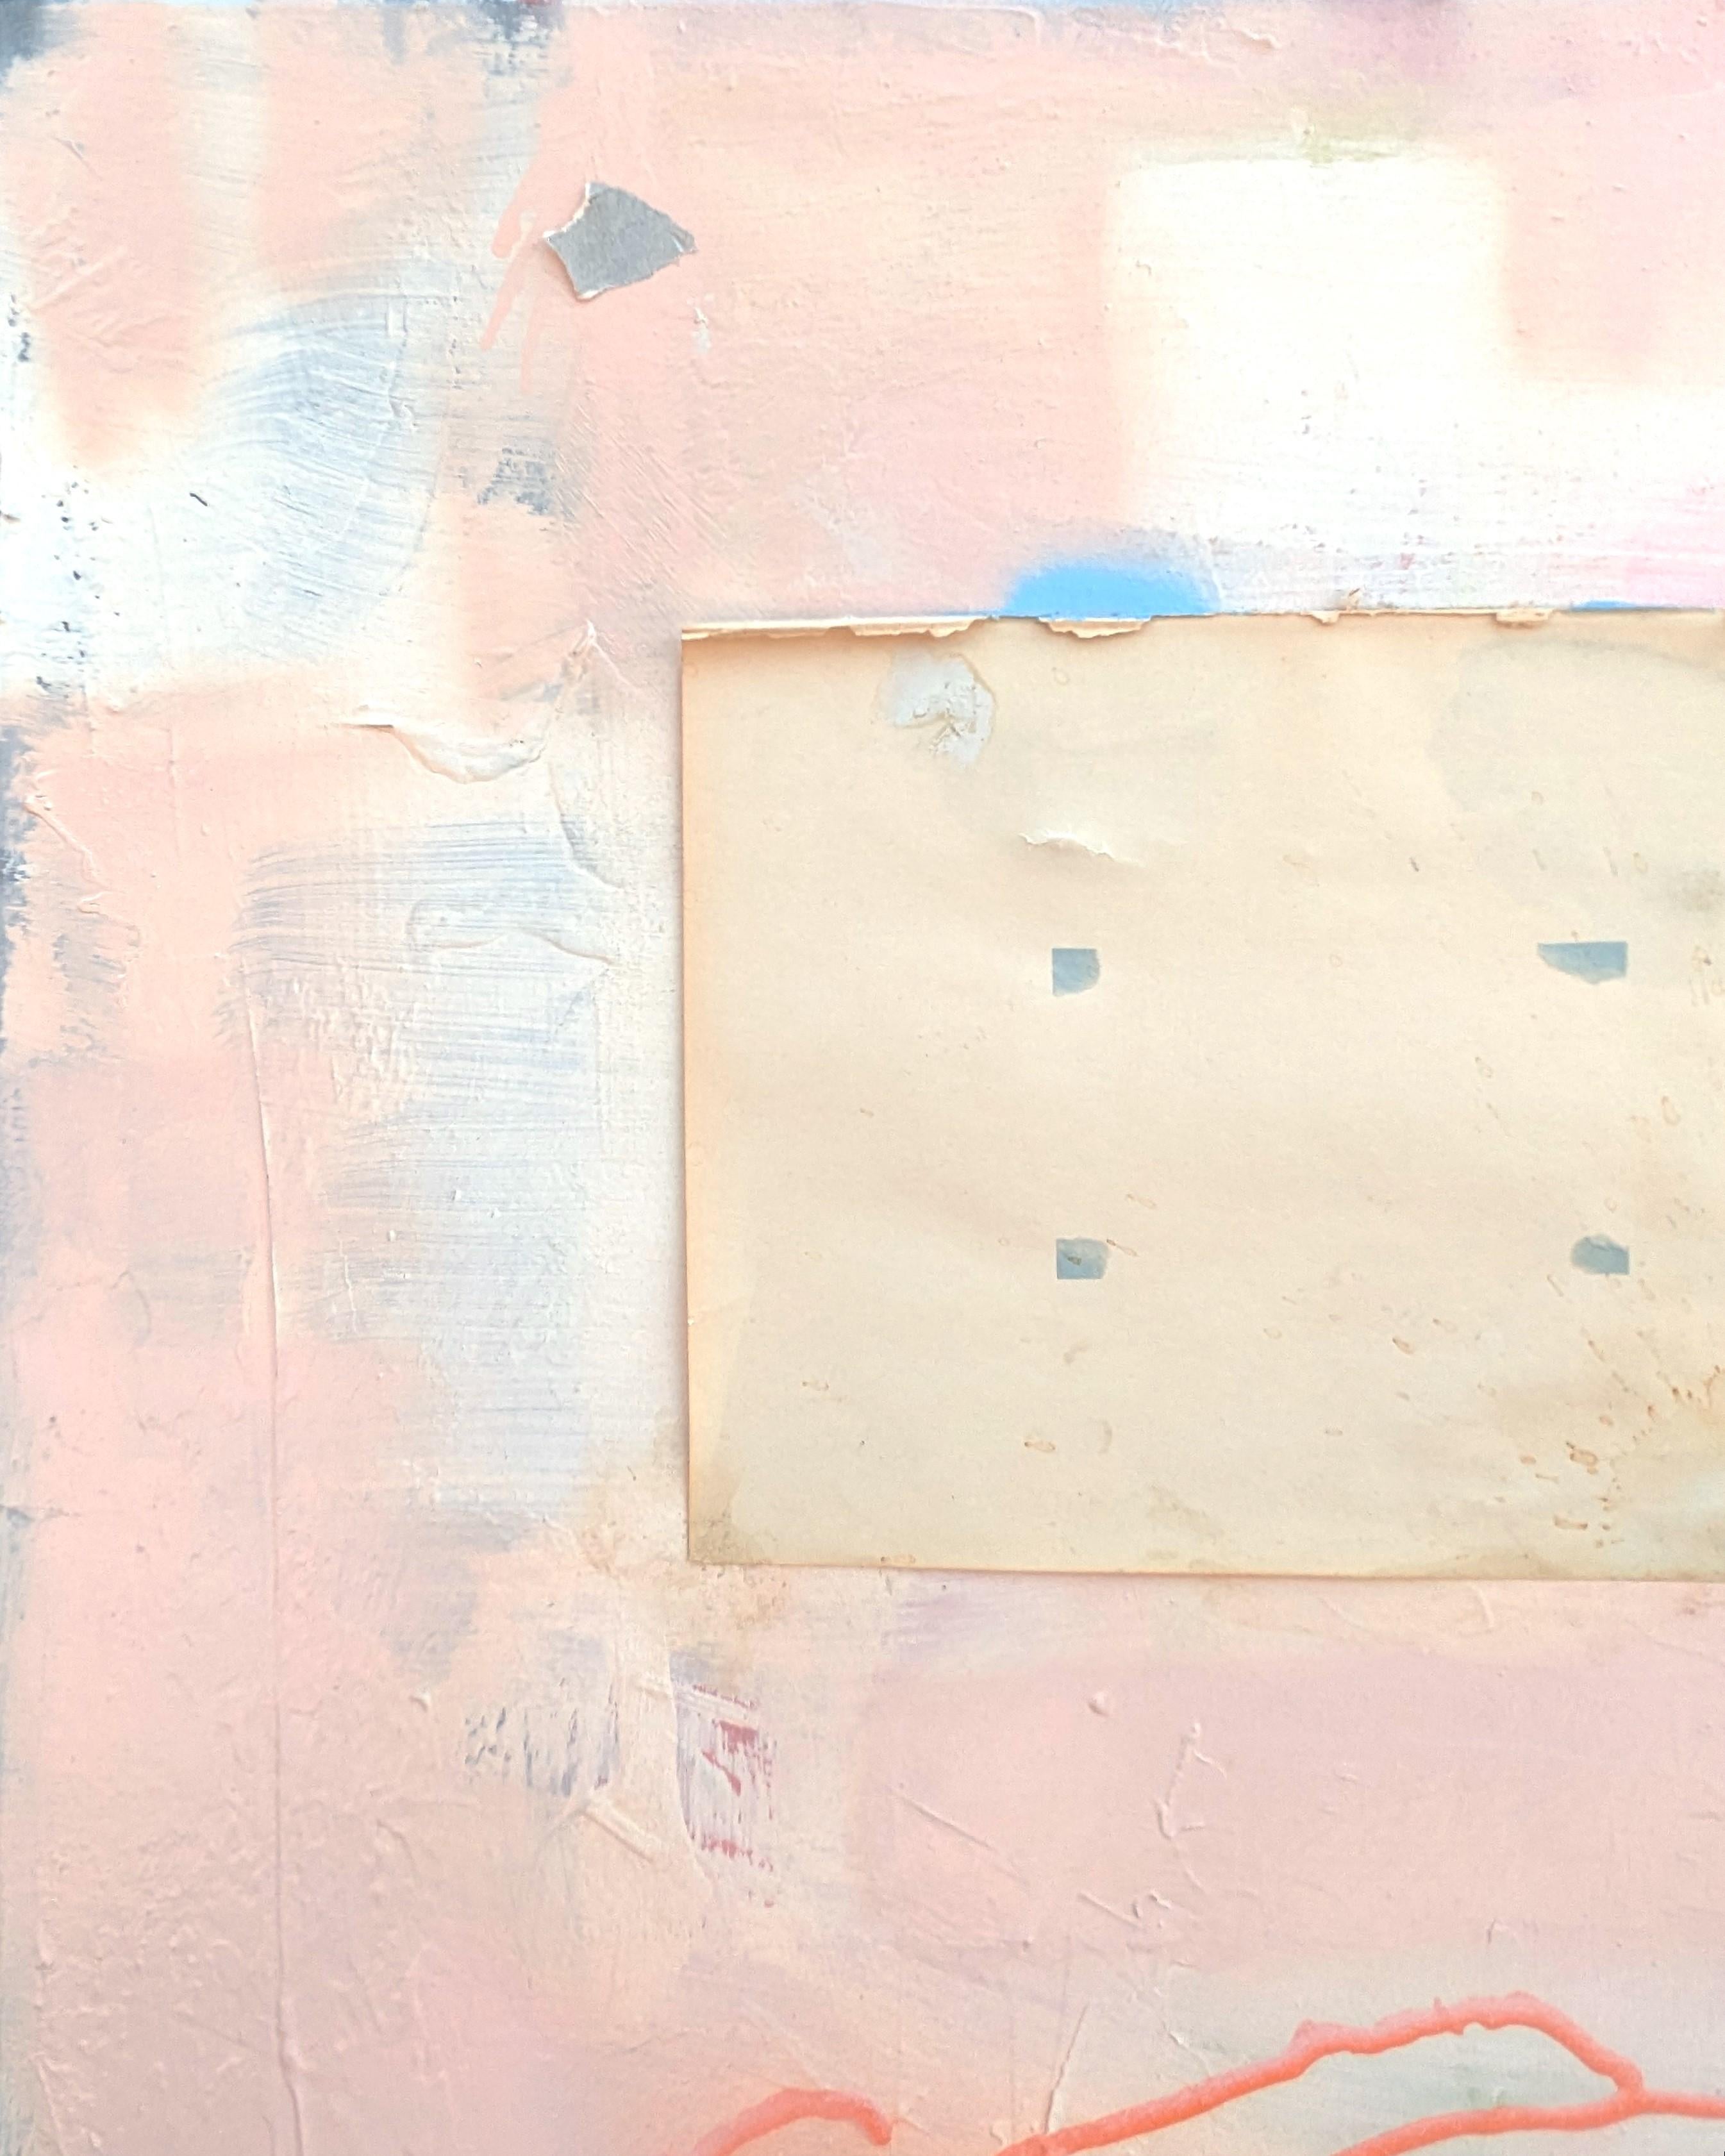 Abstract expressionist oil painting by contemporary Houston artist Benji Stiles. The work features a book page surrounded by gestural marks in pastel blue and orange set against a pink background. Currently unframed, but options are